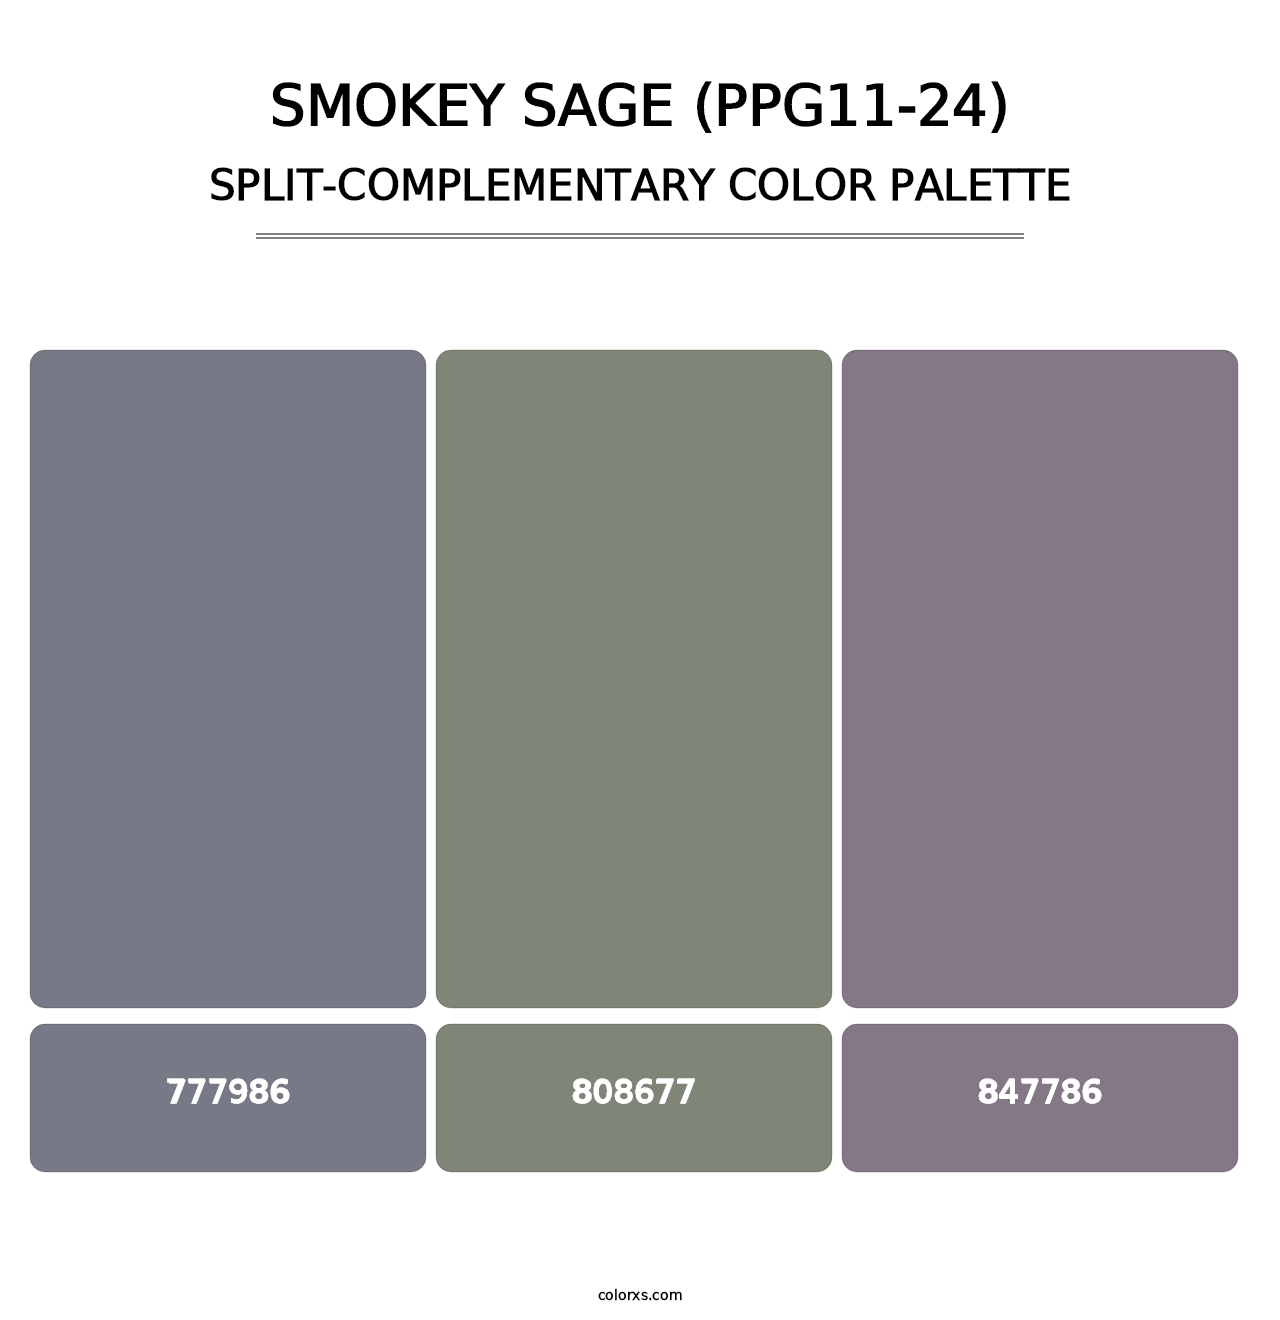 Smokey Sage (PPG11-24) - Split-Complementary Color Palette